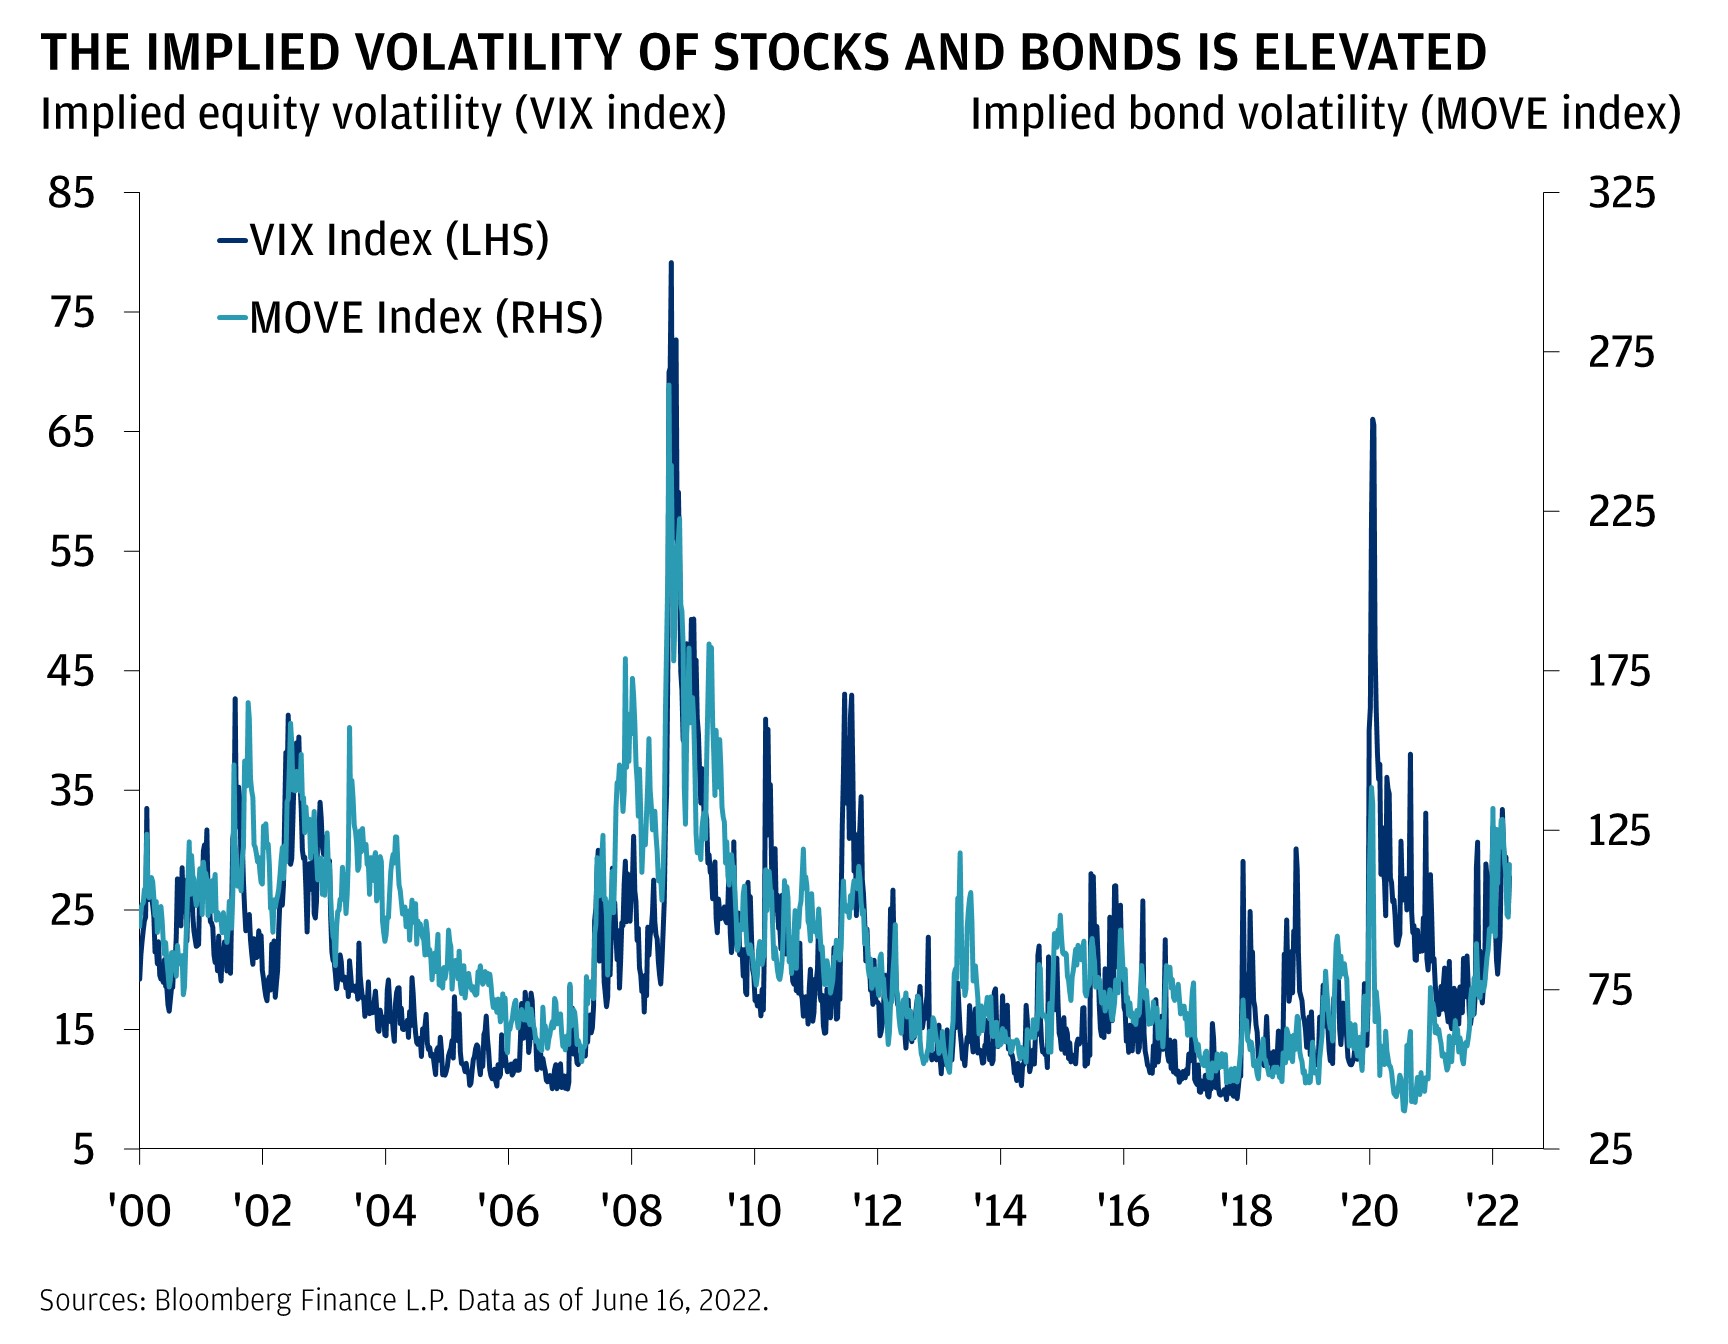 This chart shows the implied equity volatility (shown using the VIX) and implied bond volatility (shown using the MOVE Index) from 2000 to 2022.